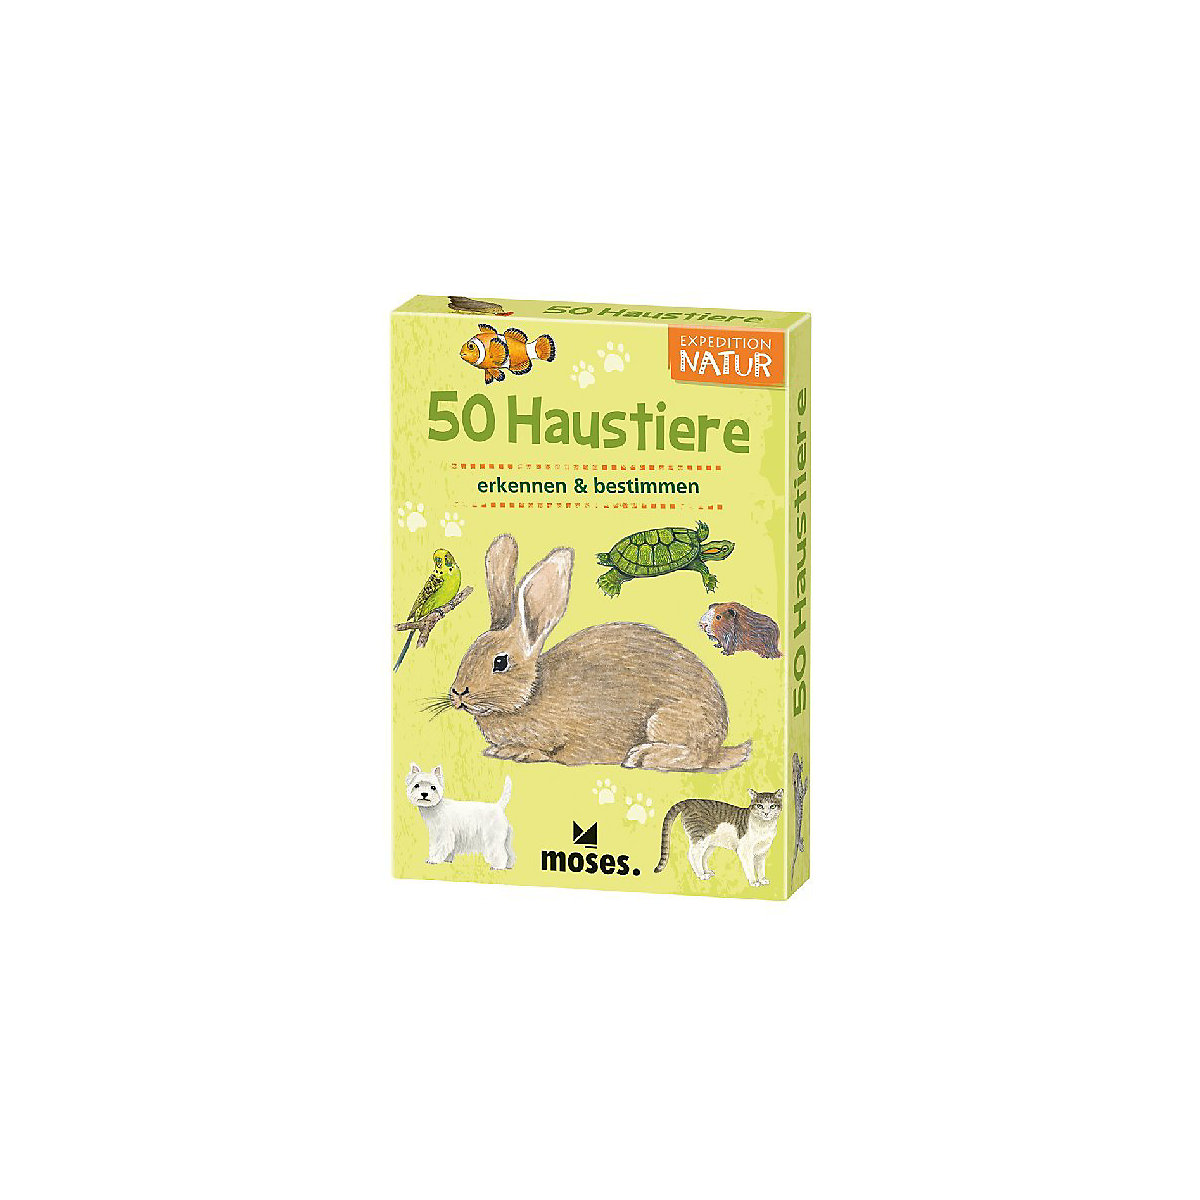 Expedition Natur: 50 Haustiere